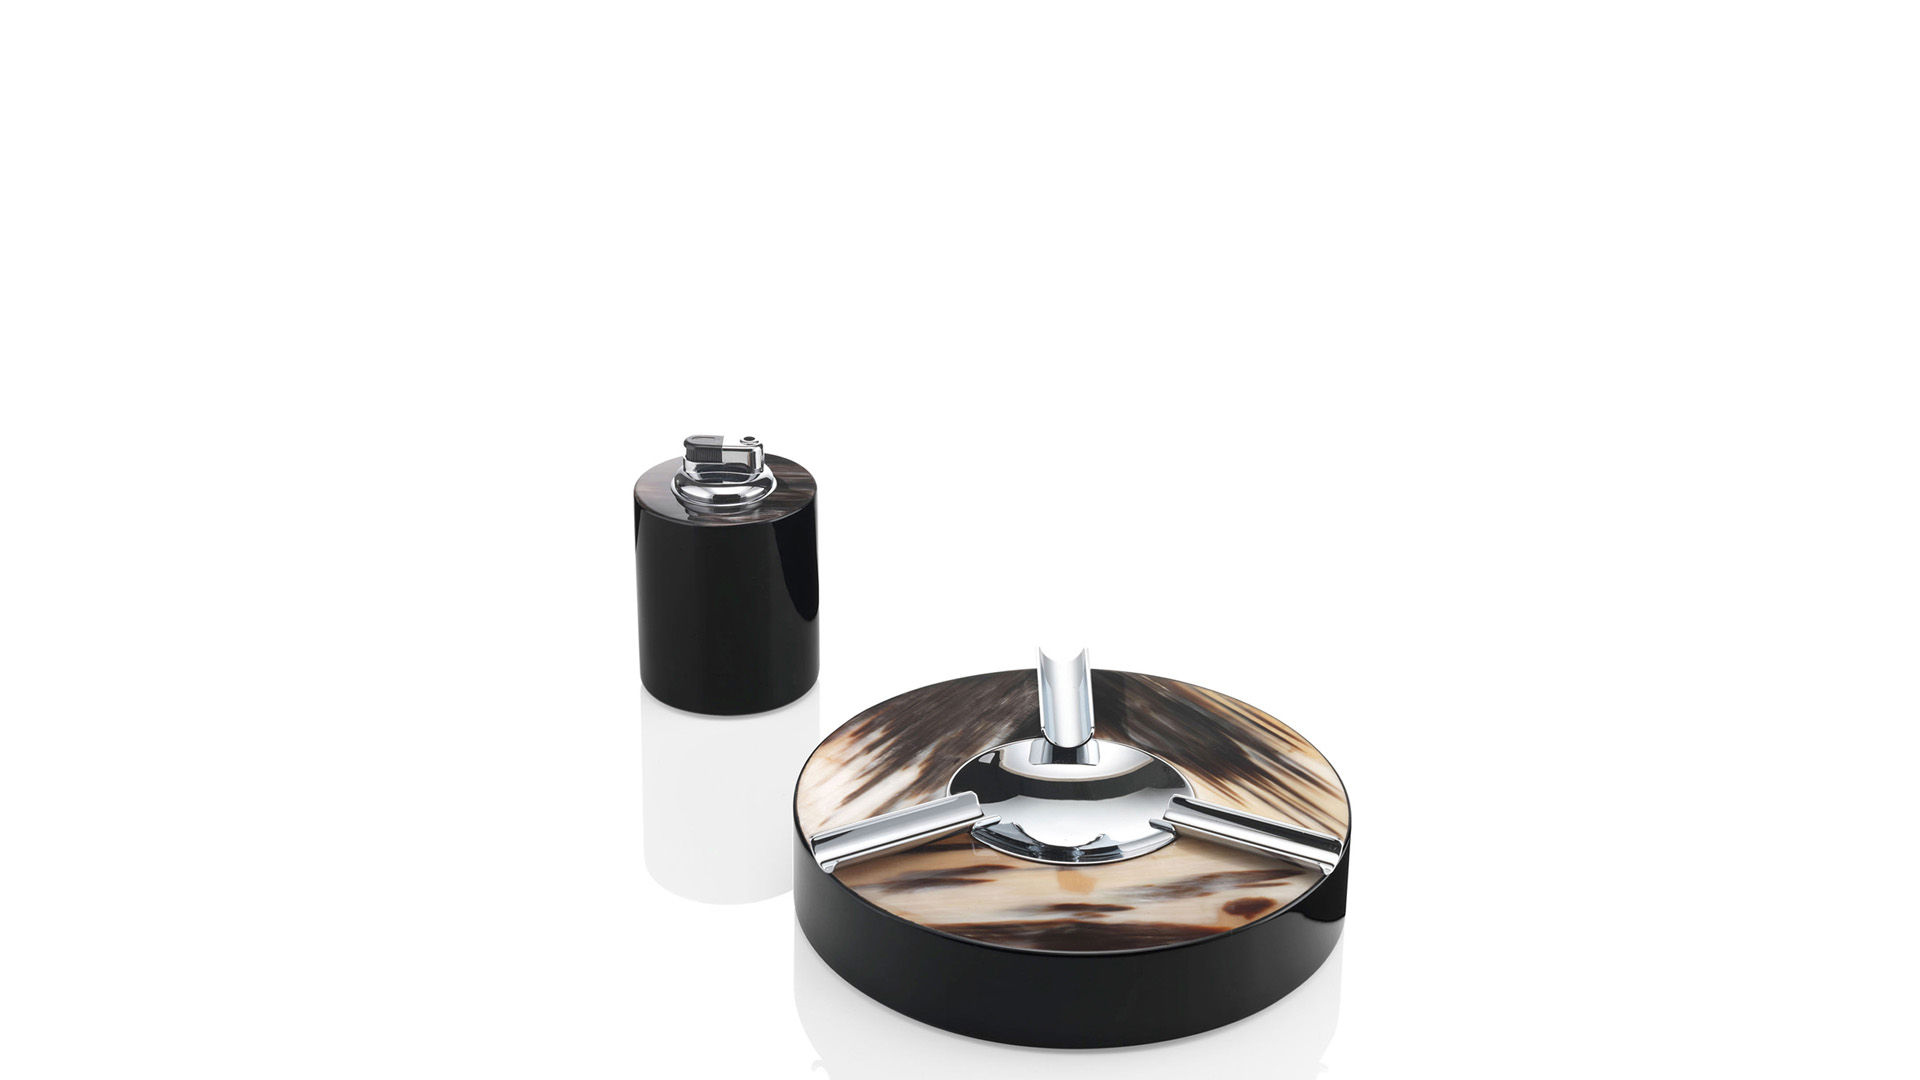 Office sets and smoking accessories - Clinio smoking set in horn and glossy black lacquered wood - cover - Arcahorn